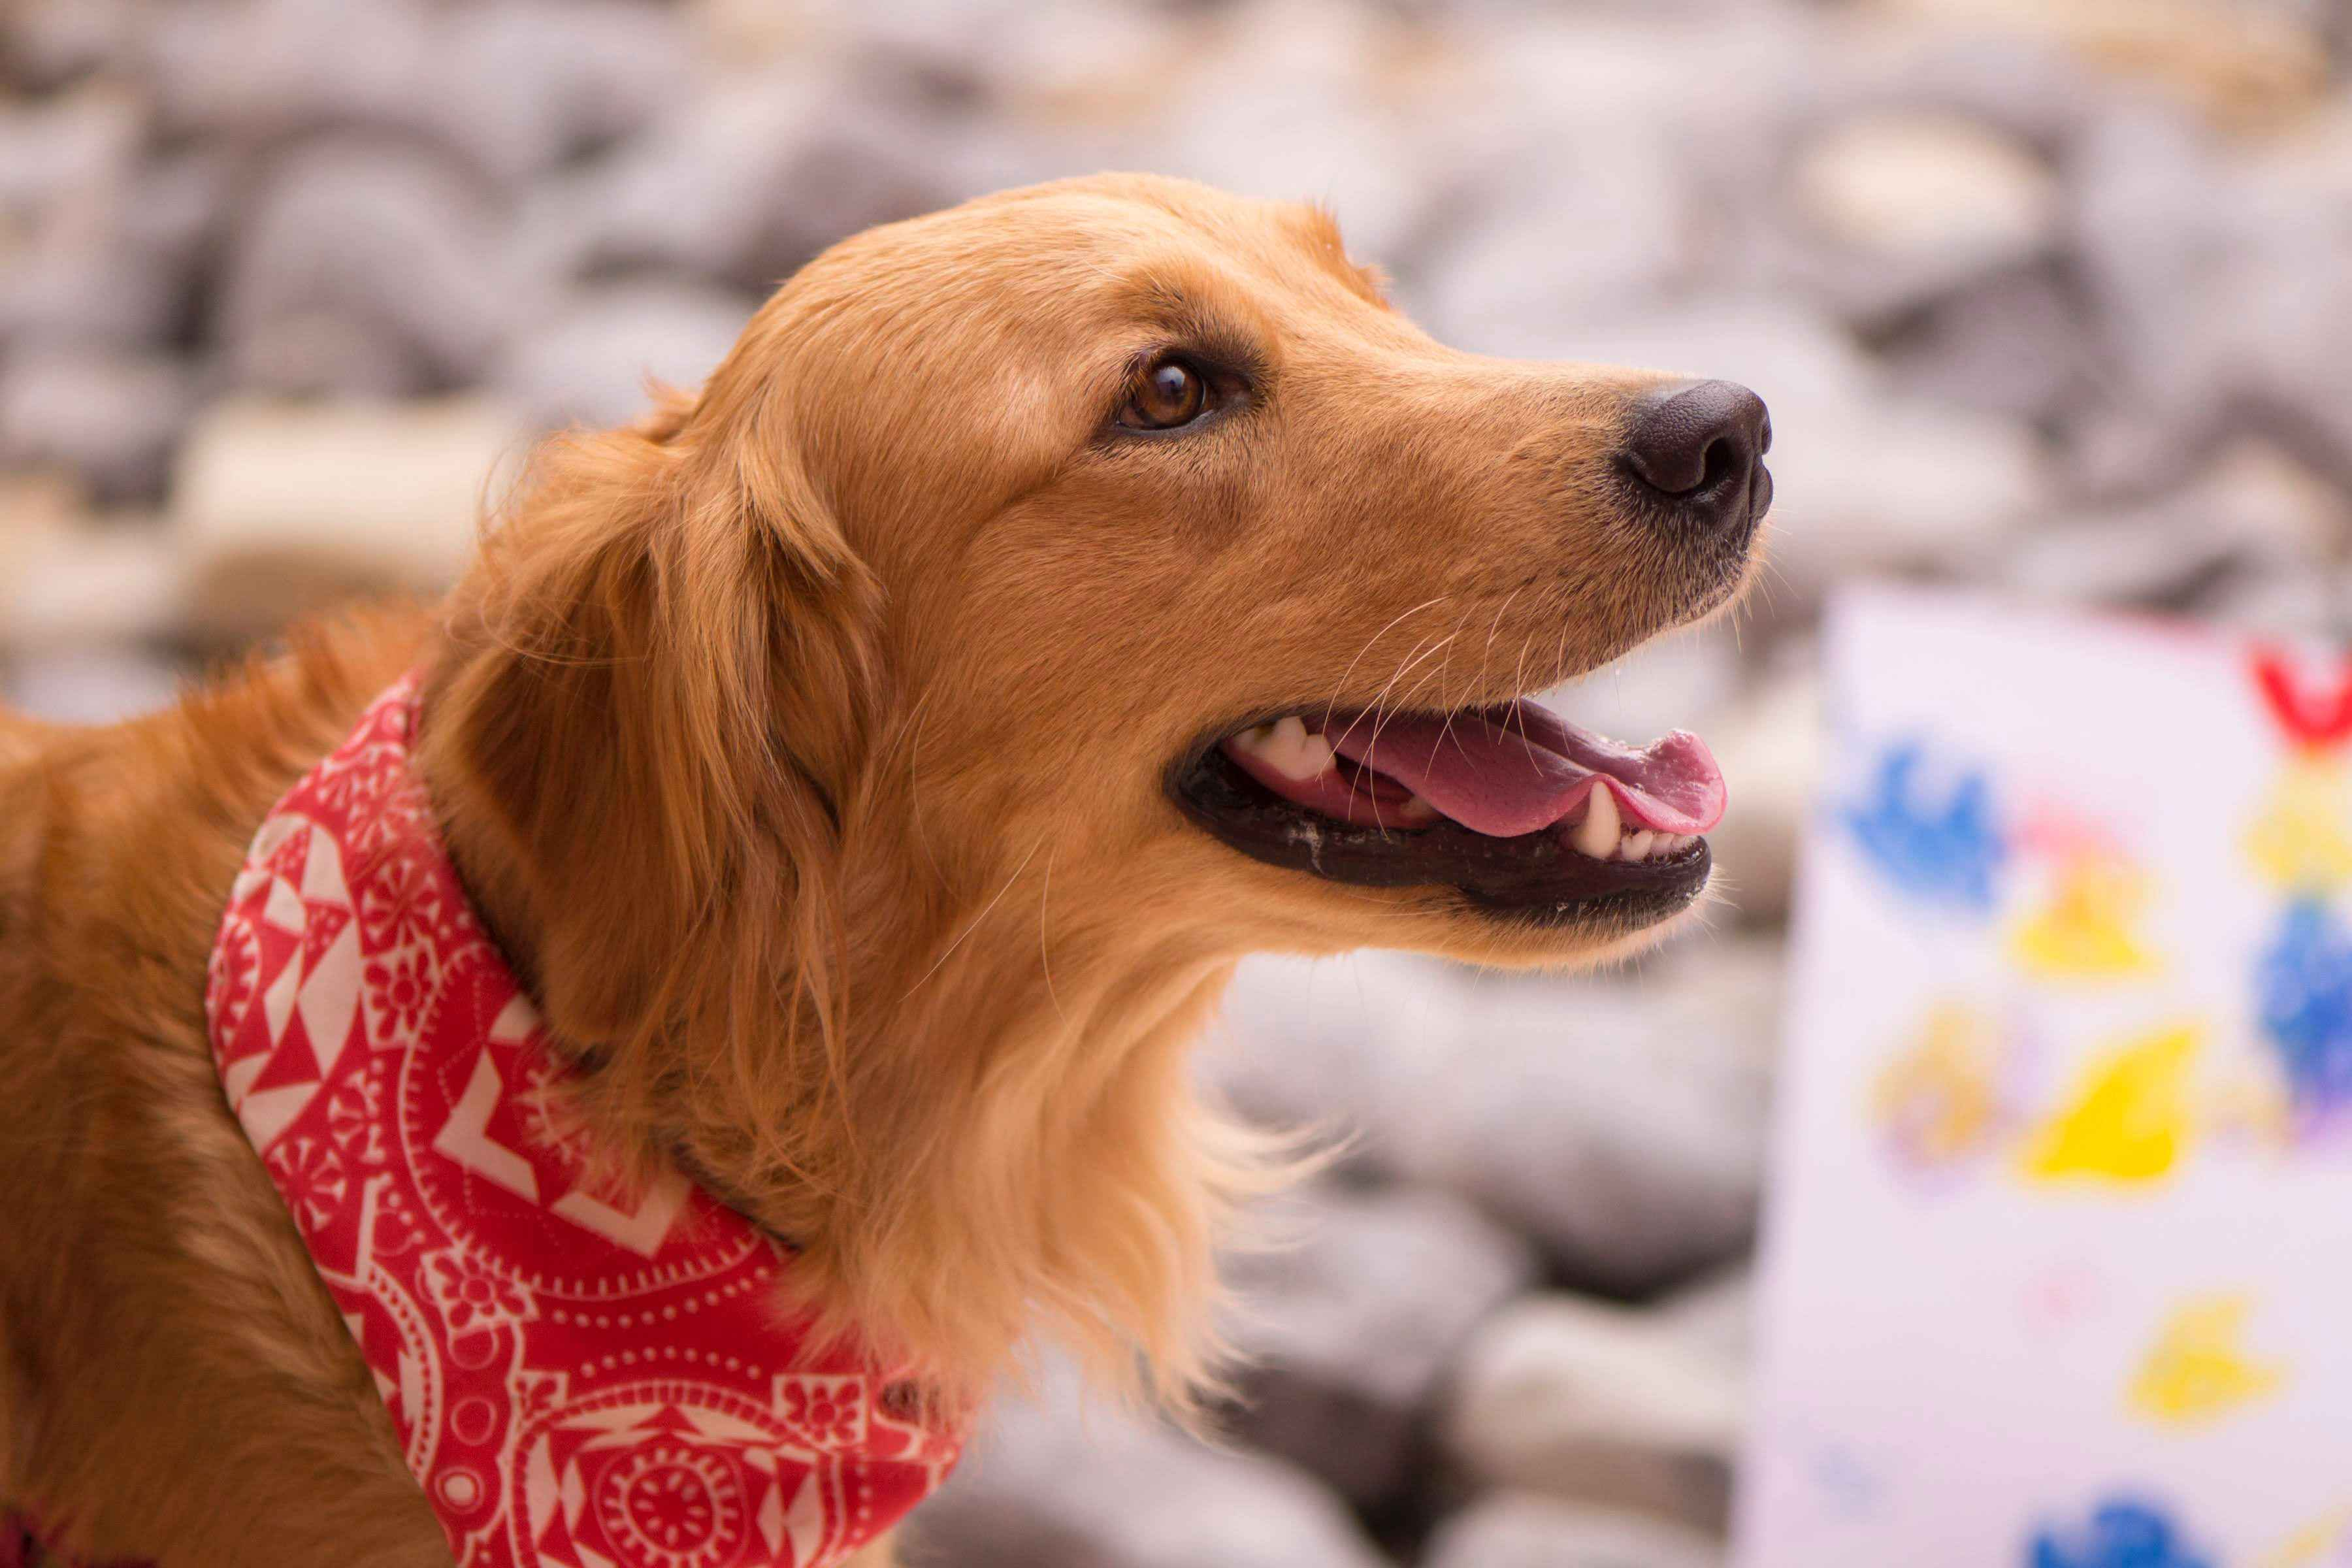 Can Golden Retrievers be trained to participate in agility or obedience competitions?